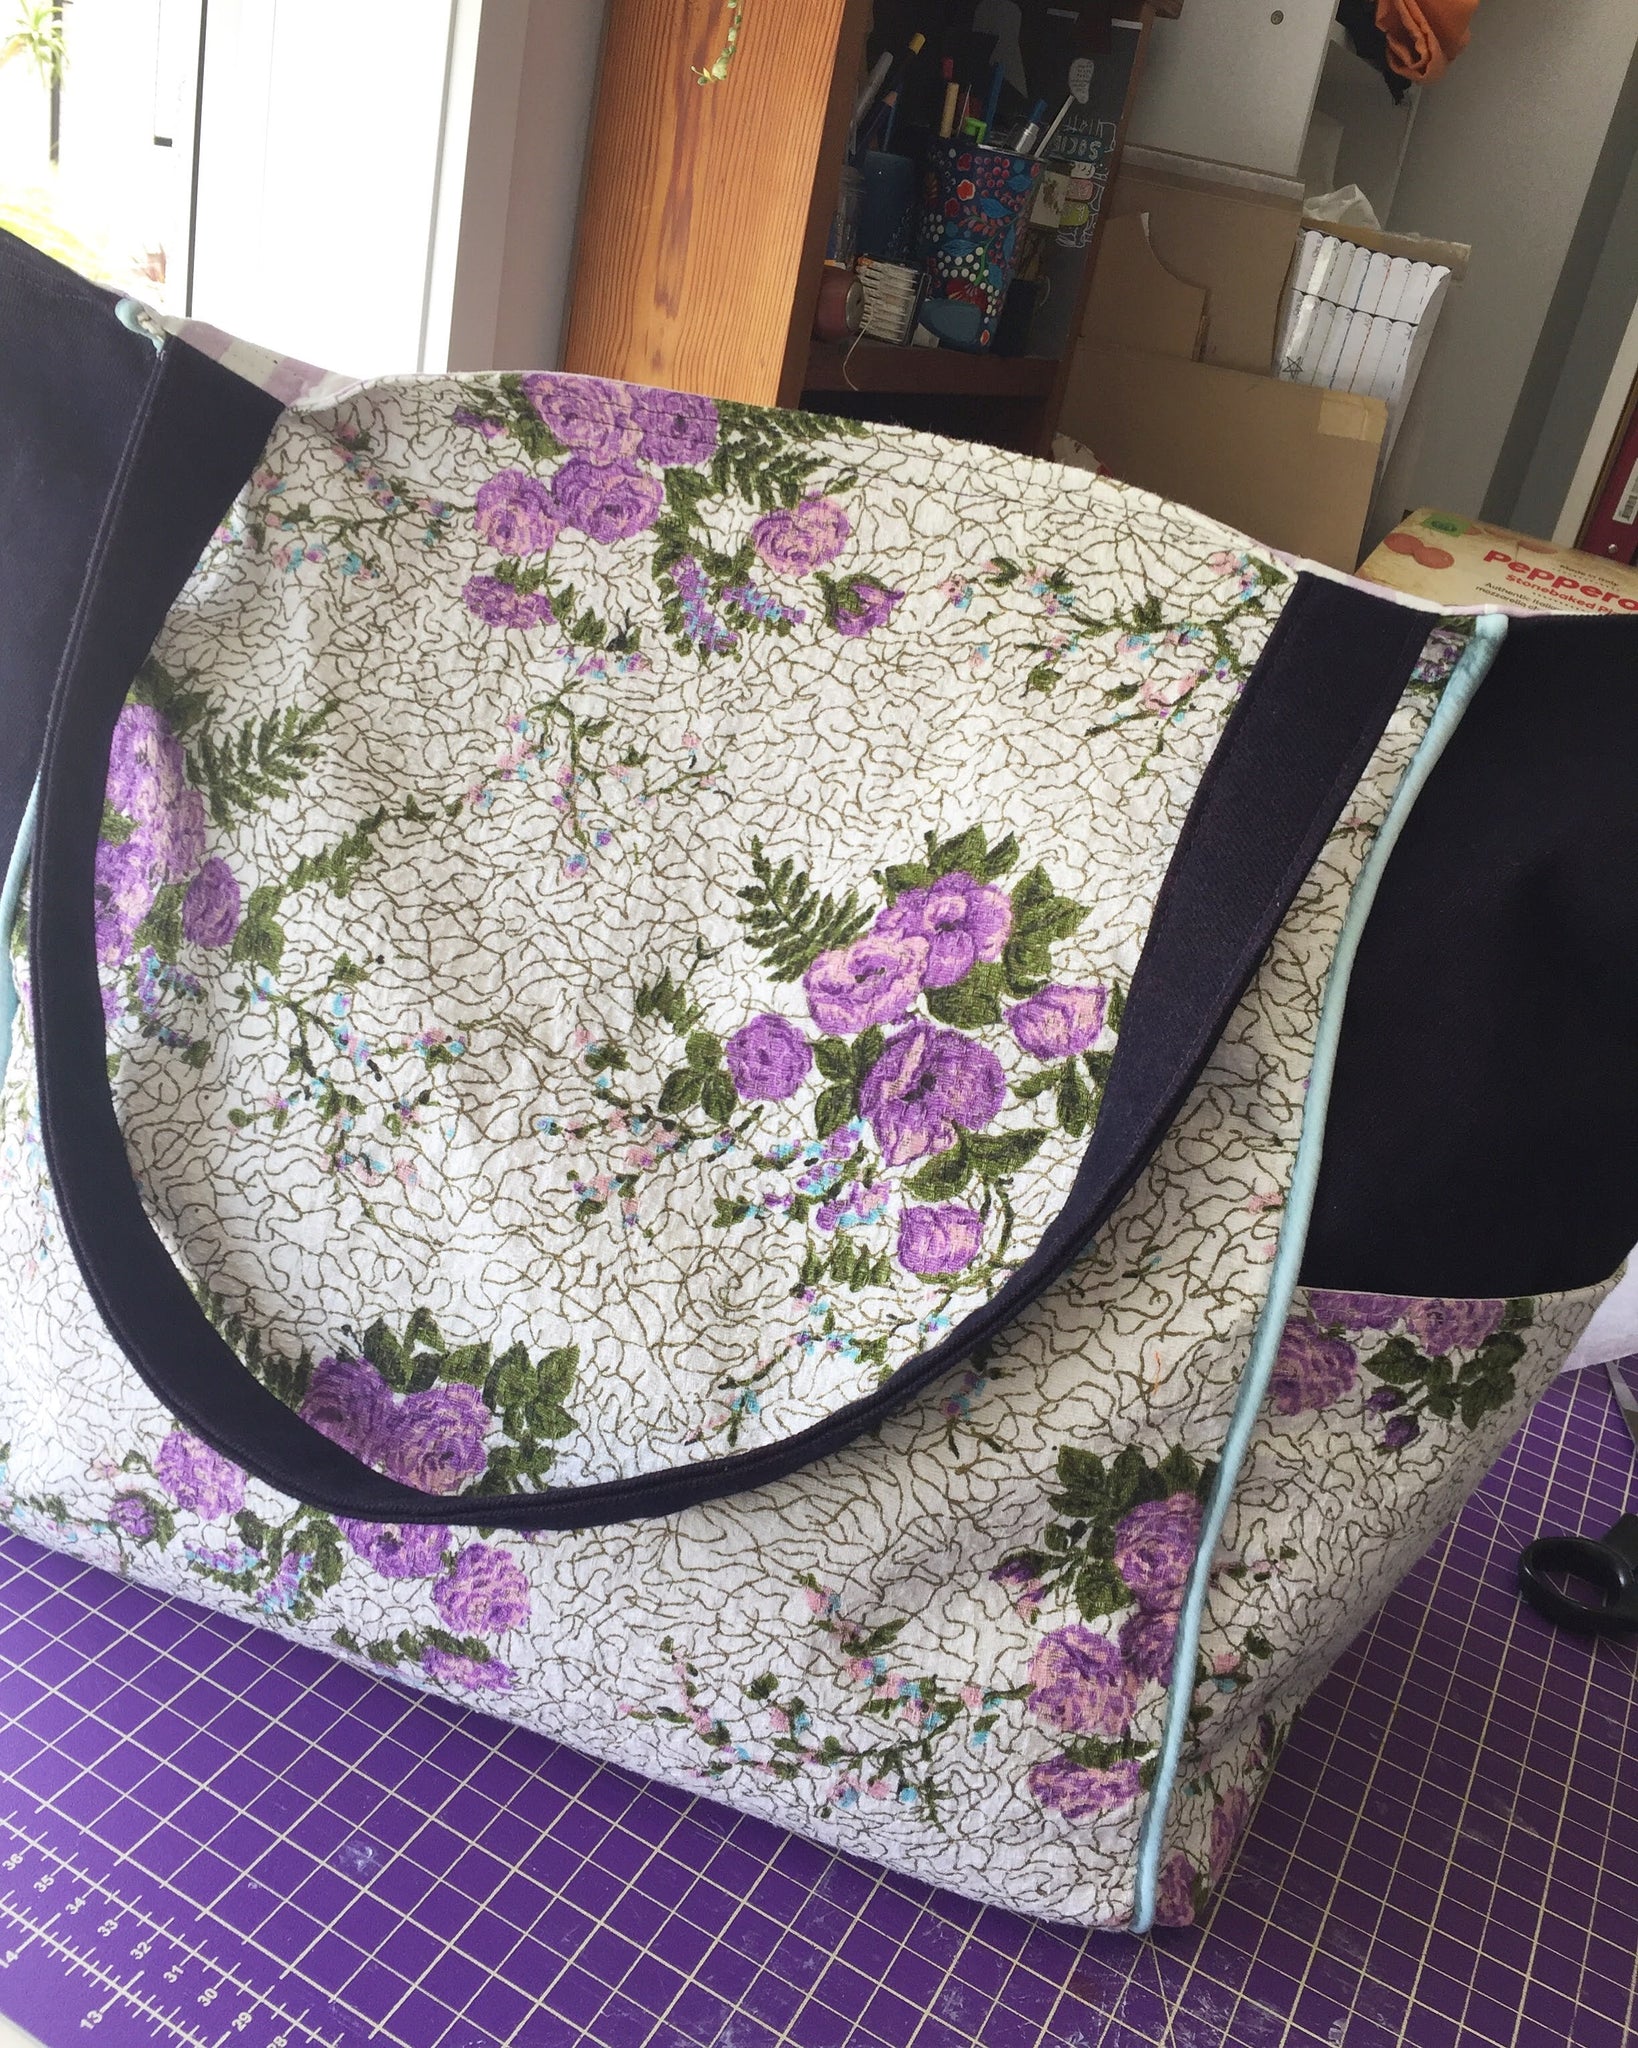 Large Beach Bag made from retro and vintage fabrics